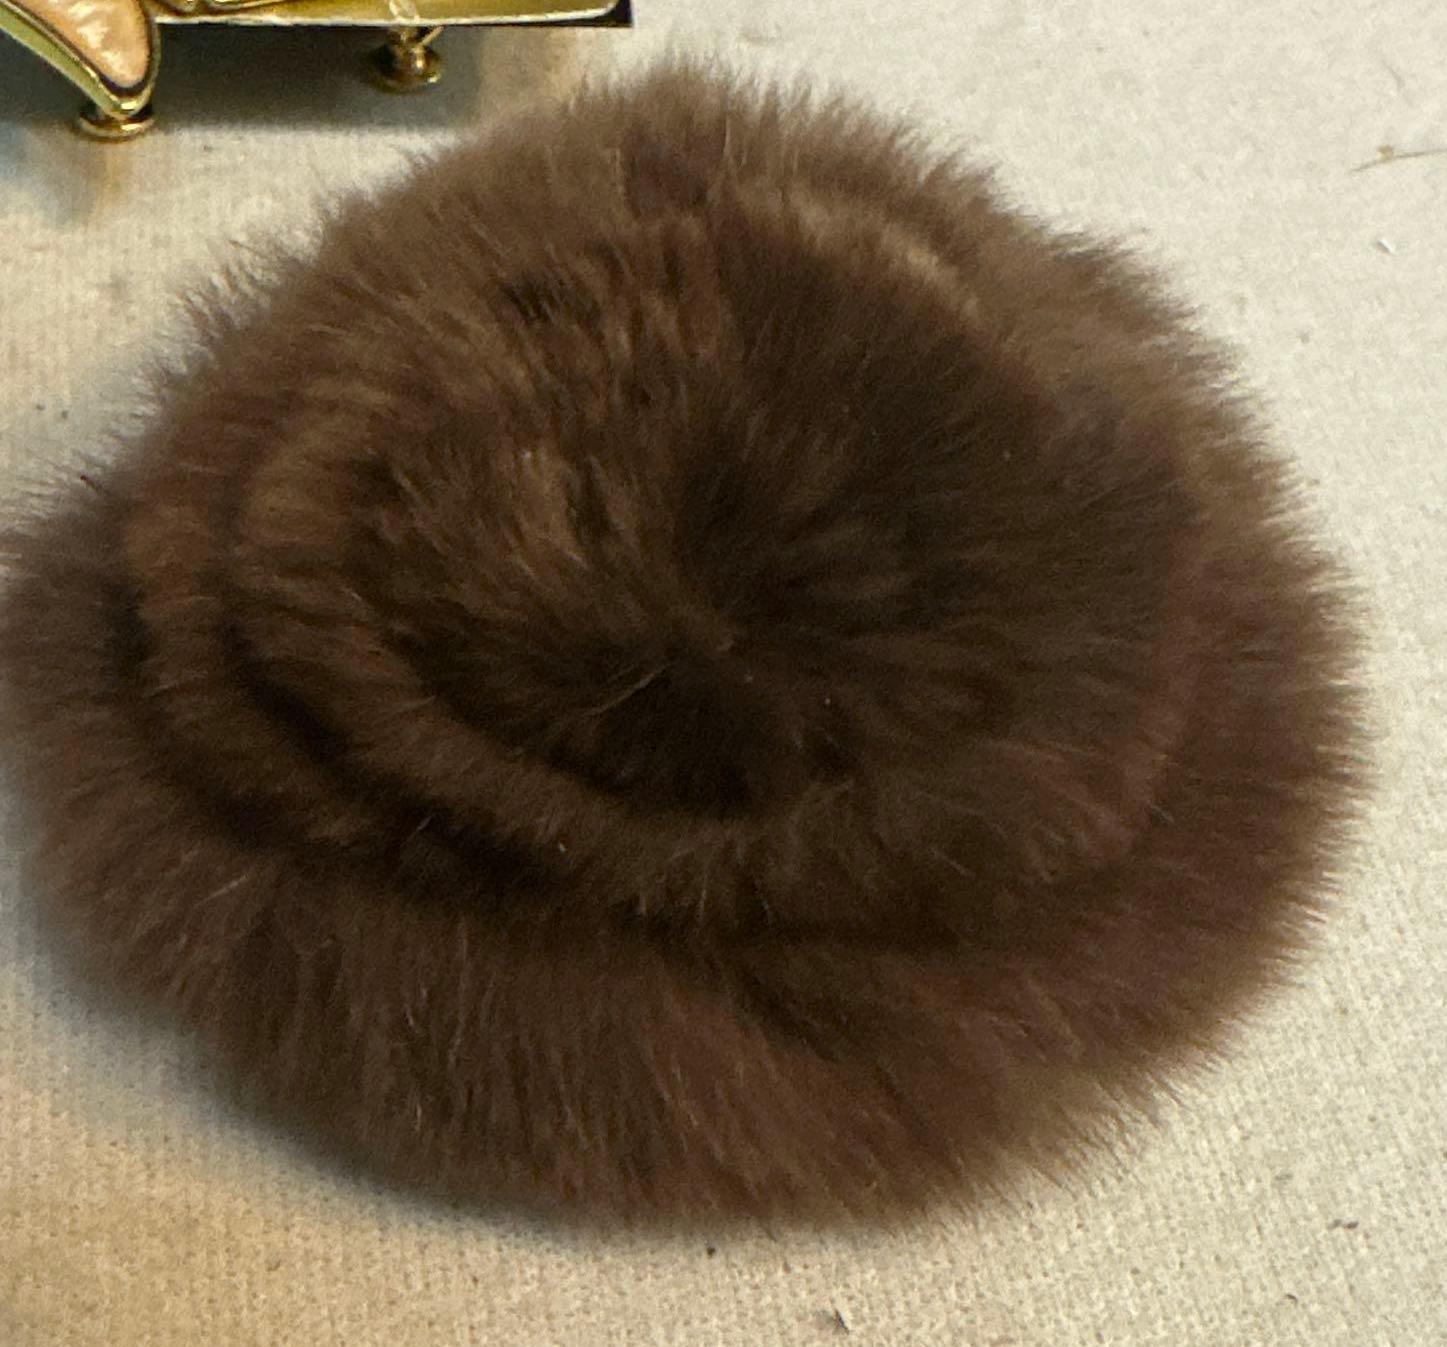 Brooch/Pin and ring Lot- 2 Brooches are Fur Lined